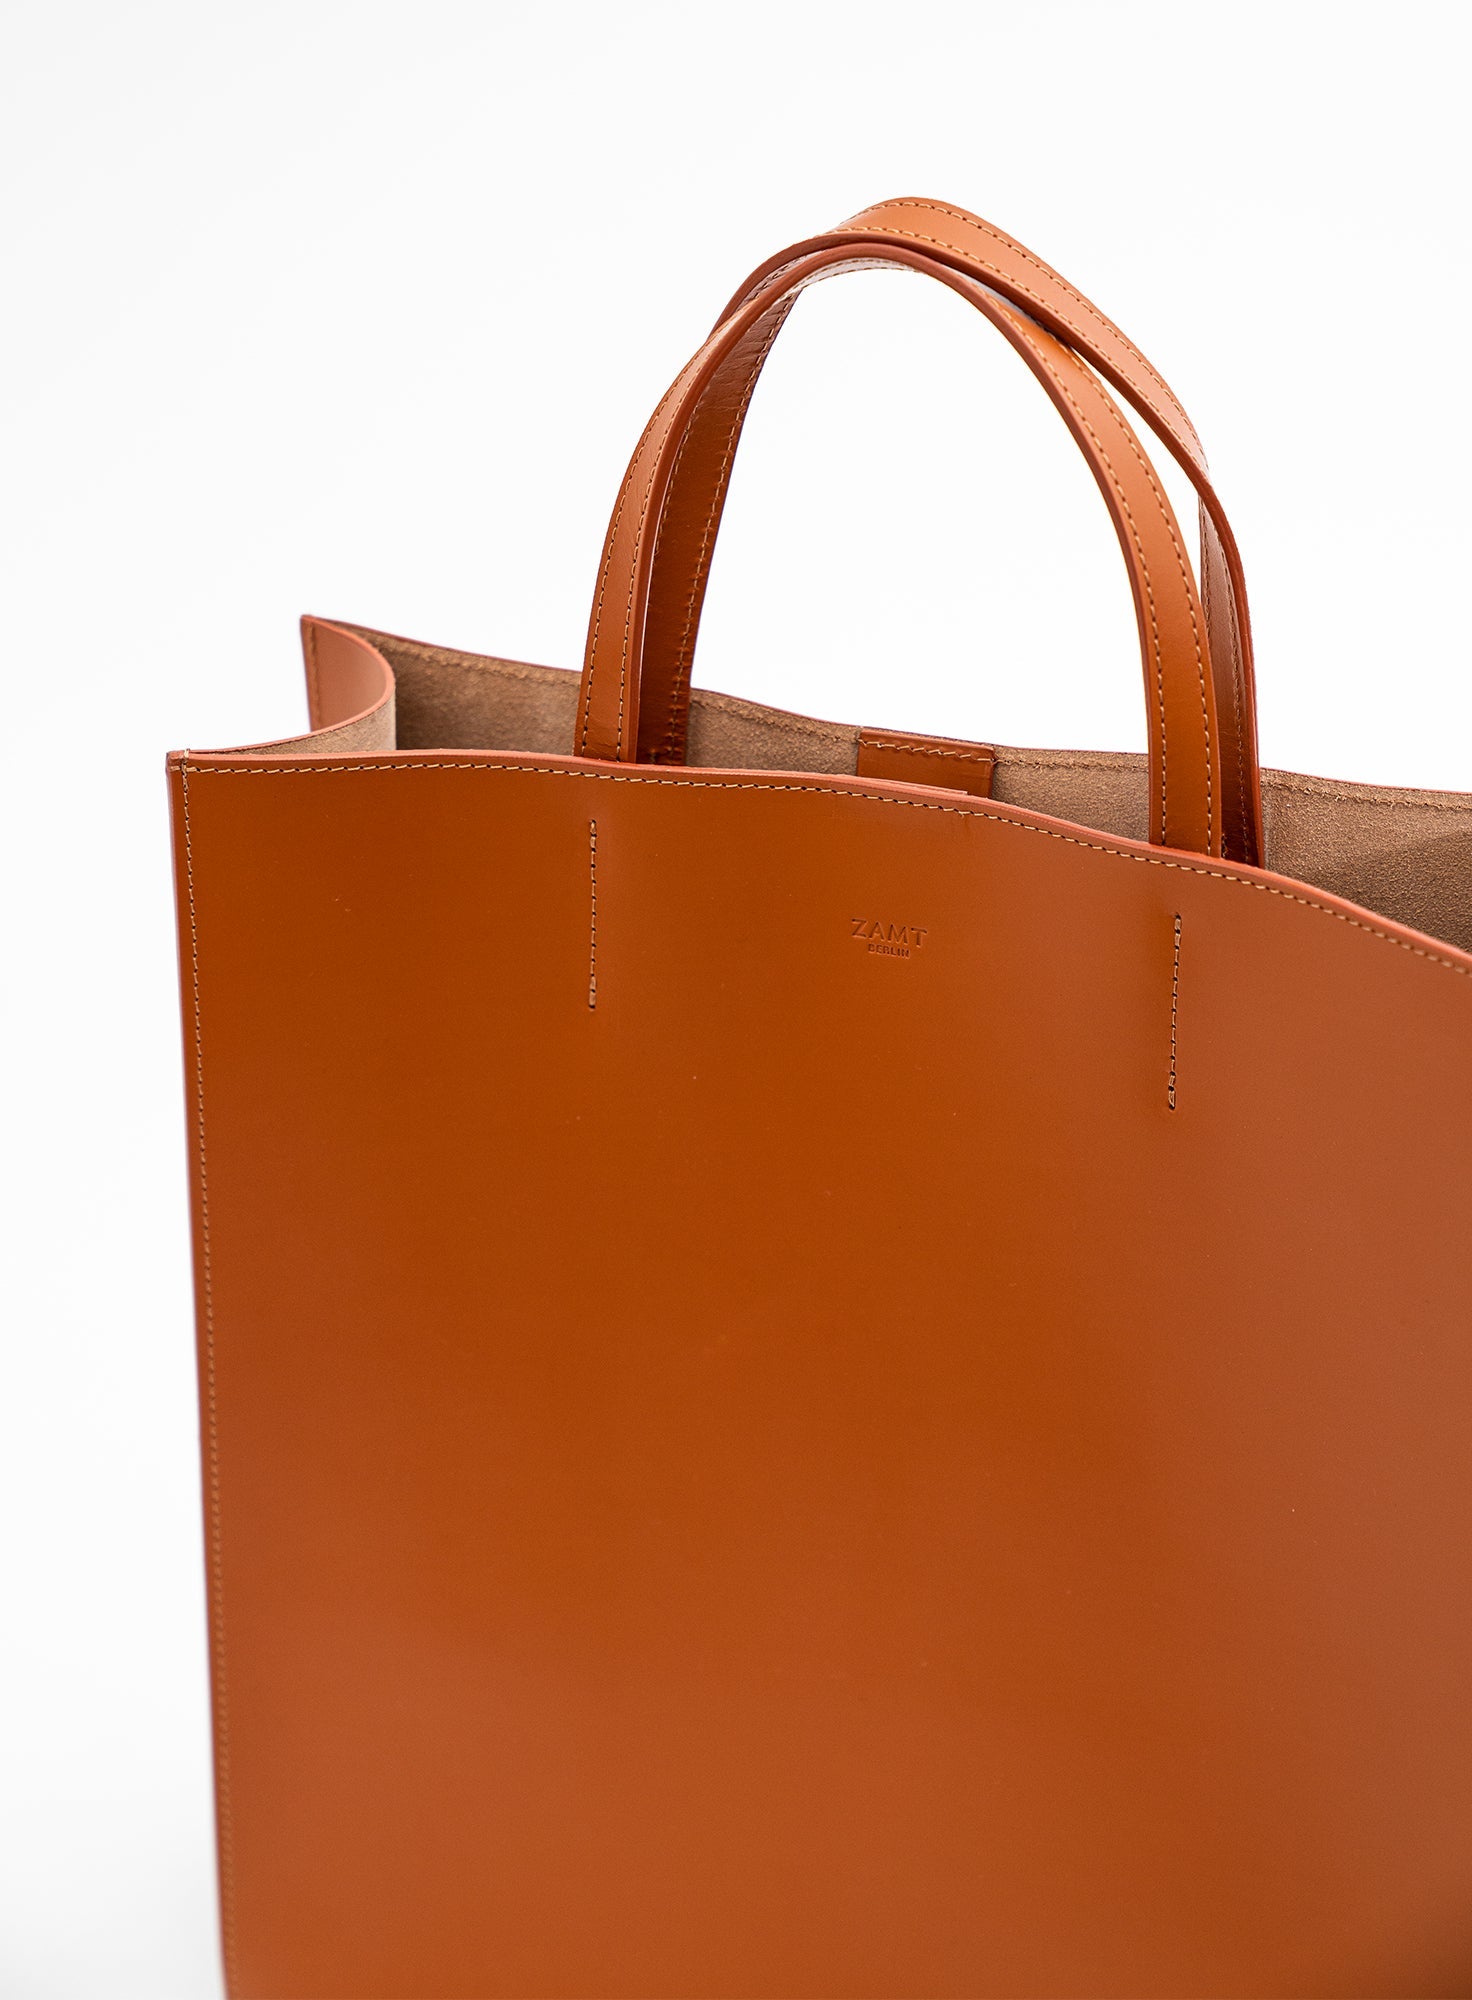 CONTAINER_BAG_FINCH_BRANDY_Designed_in_Berlin_Made_to_last_Handmade_in_Poland.